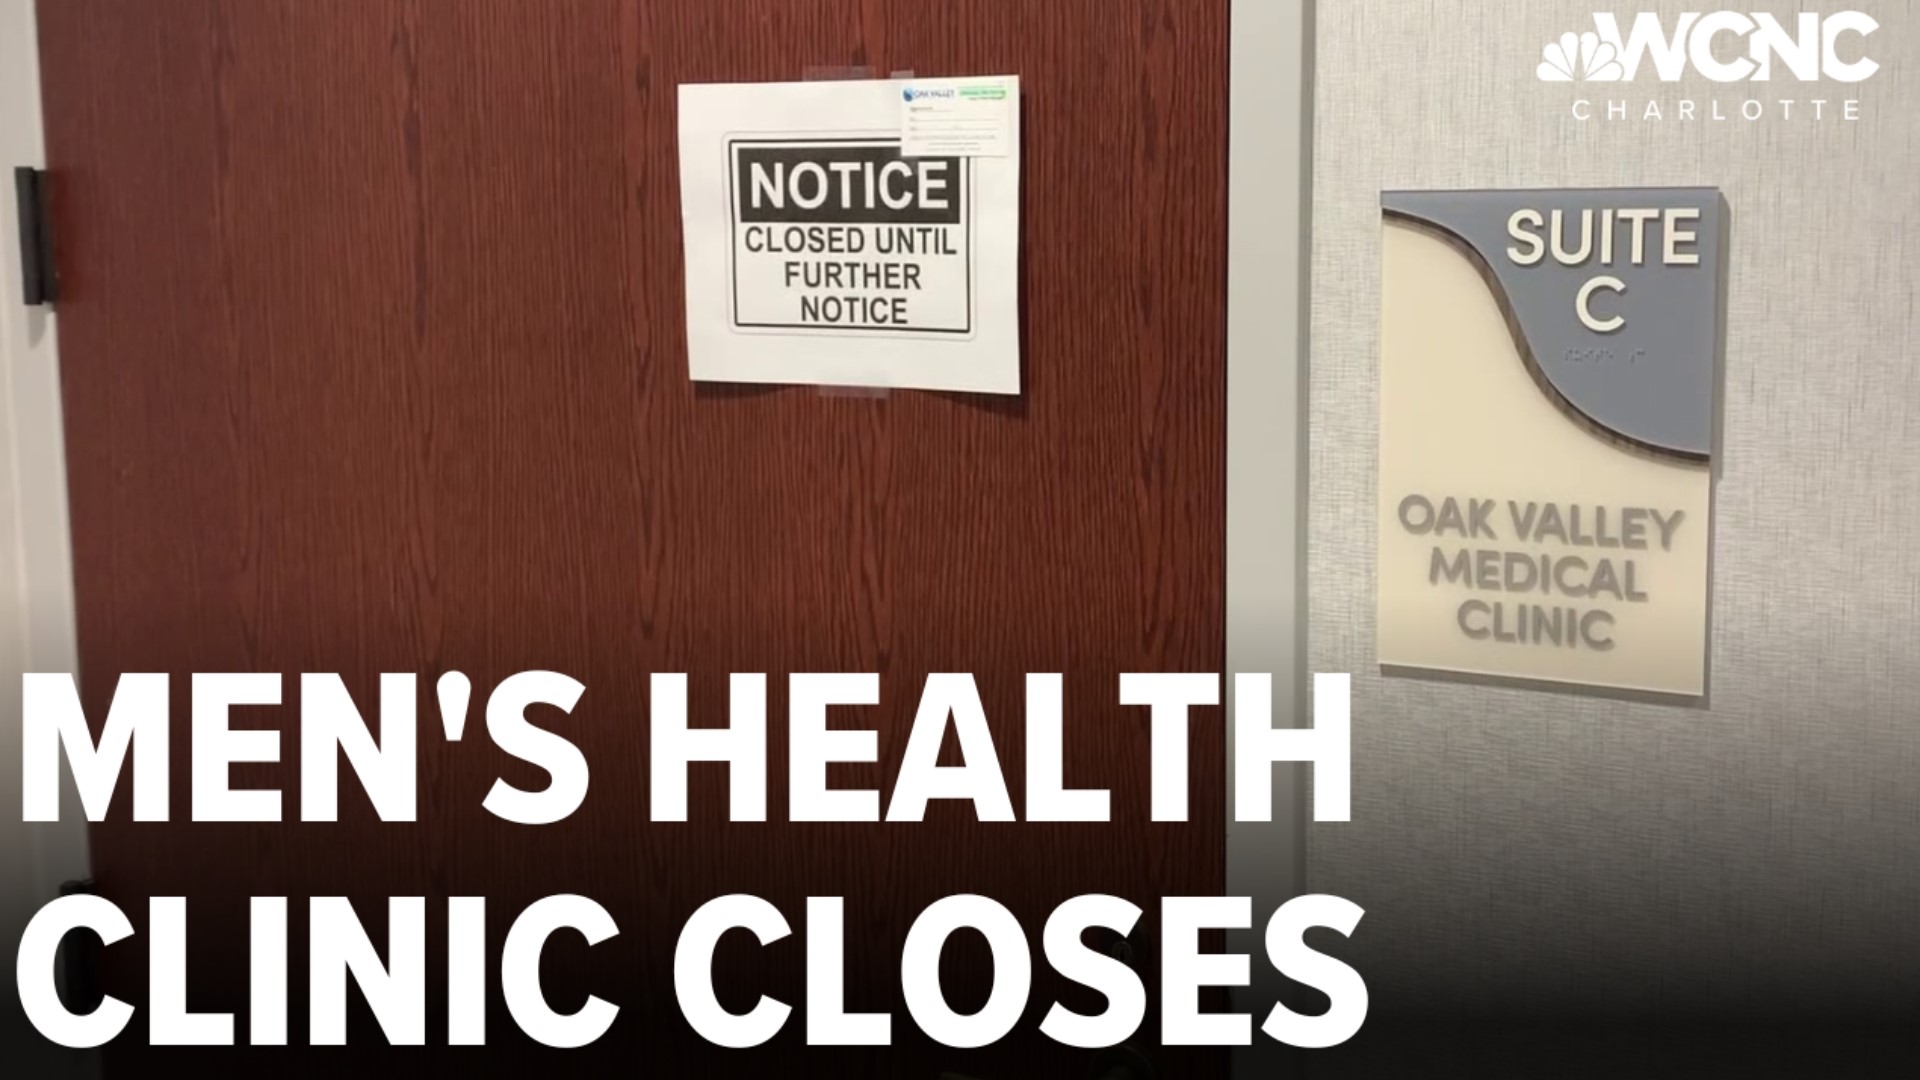 What led a popular men's health clinic to close its doors?